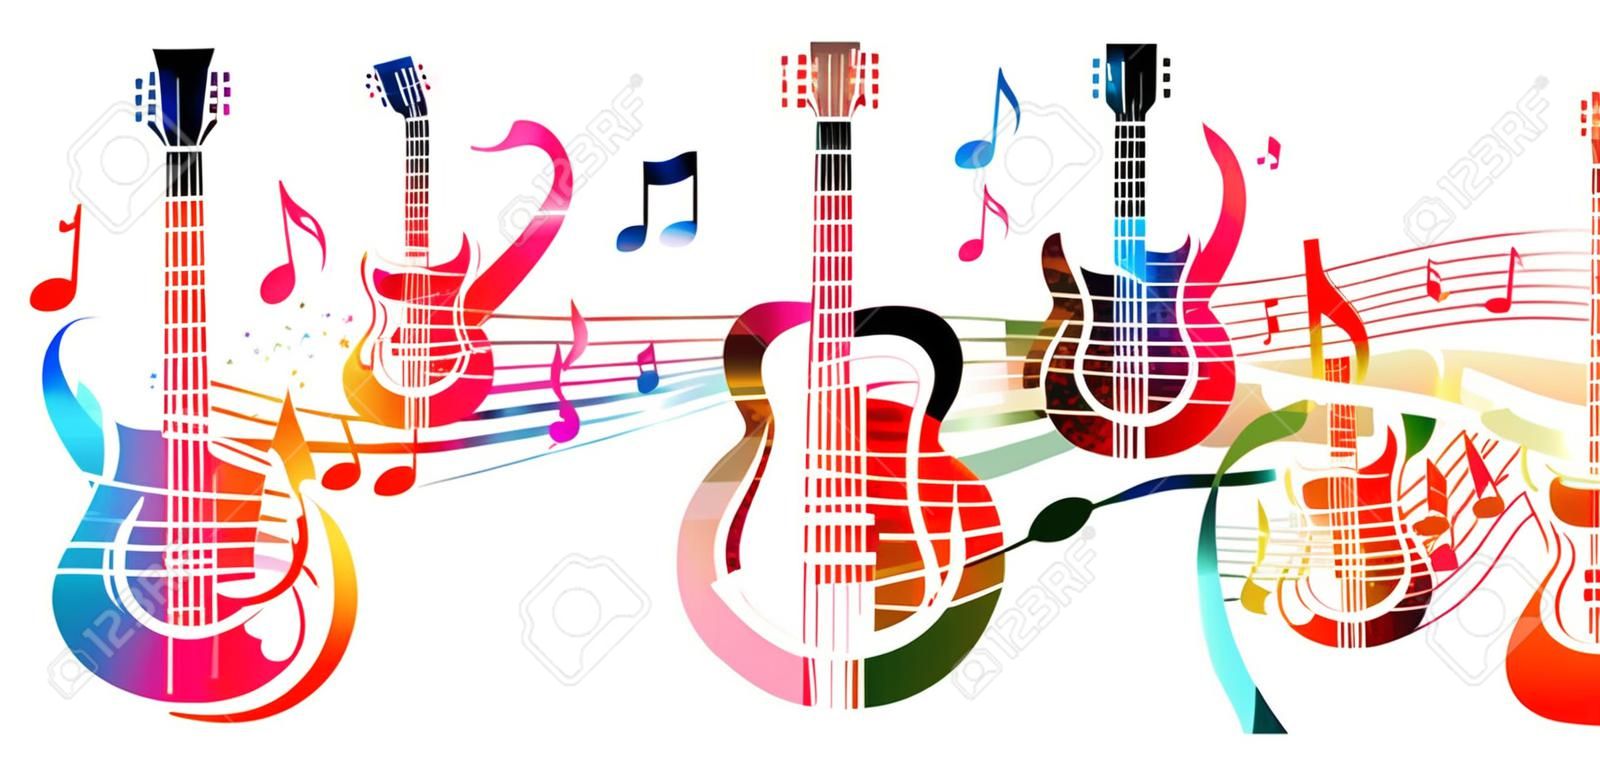 Creative music style template vector illustration, colorful guitar with music staff and notes, music instruments background. Design for poster, brochure, banner, concert, festival and music shop